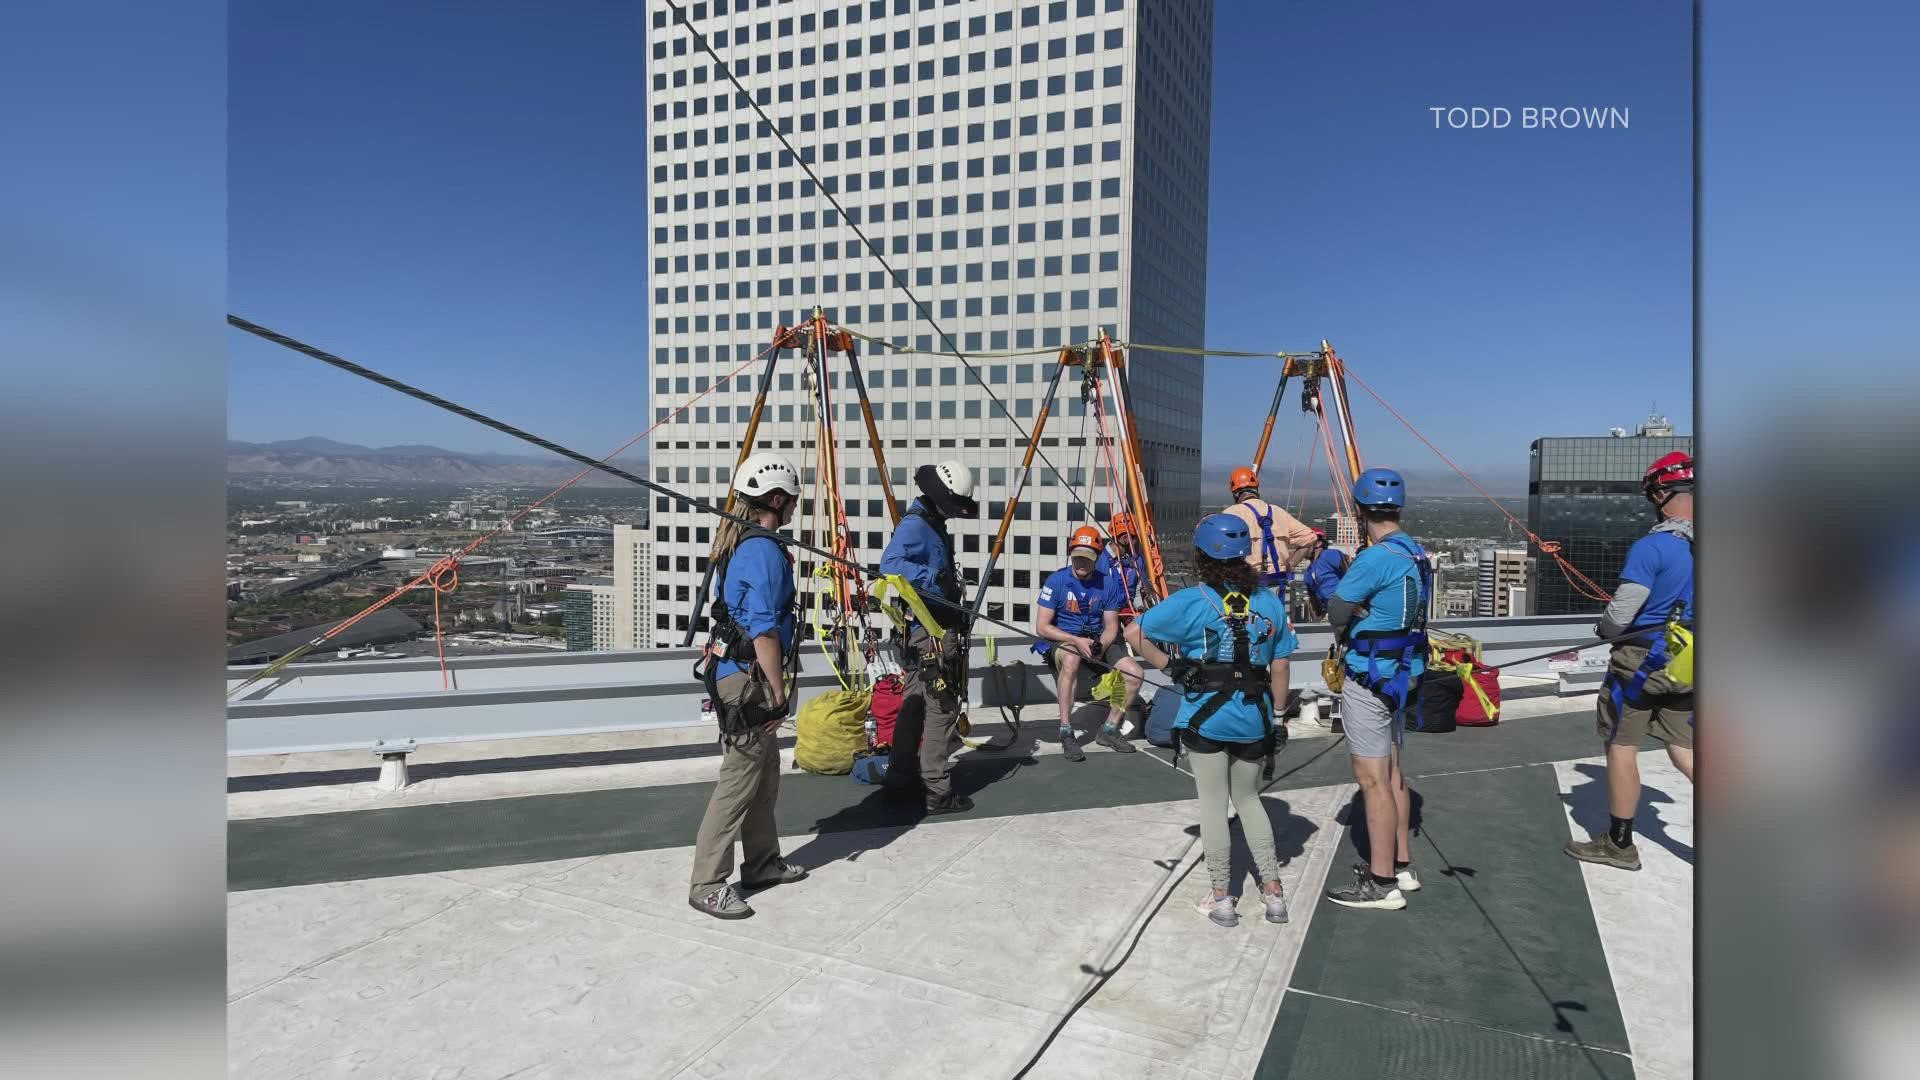 Participants in 'Over the Edge' raise $1500 in pledges and then rappel down one of Denver’s skyscrapers -- all while raising money for cancer research in Colorado.